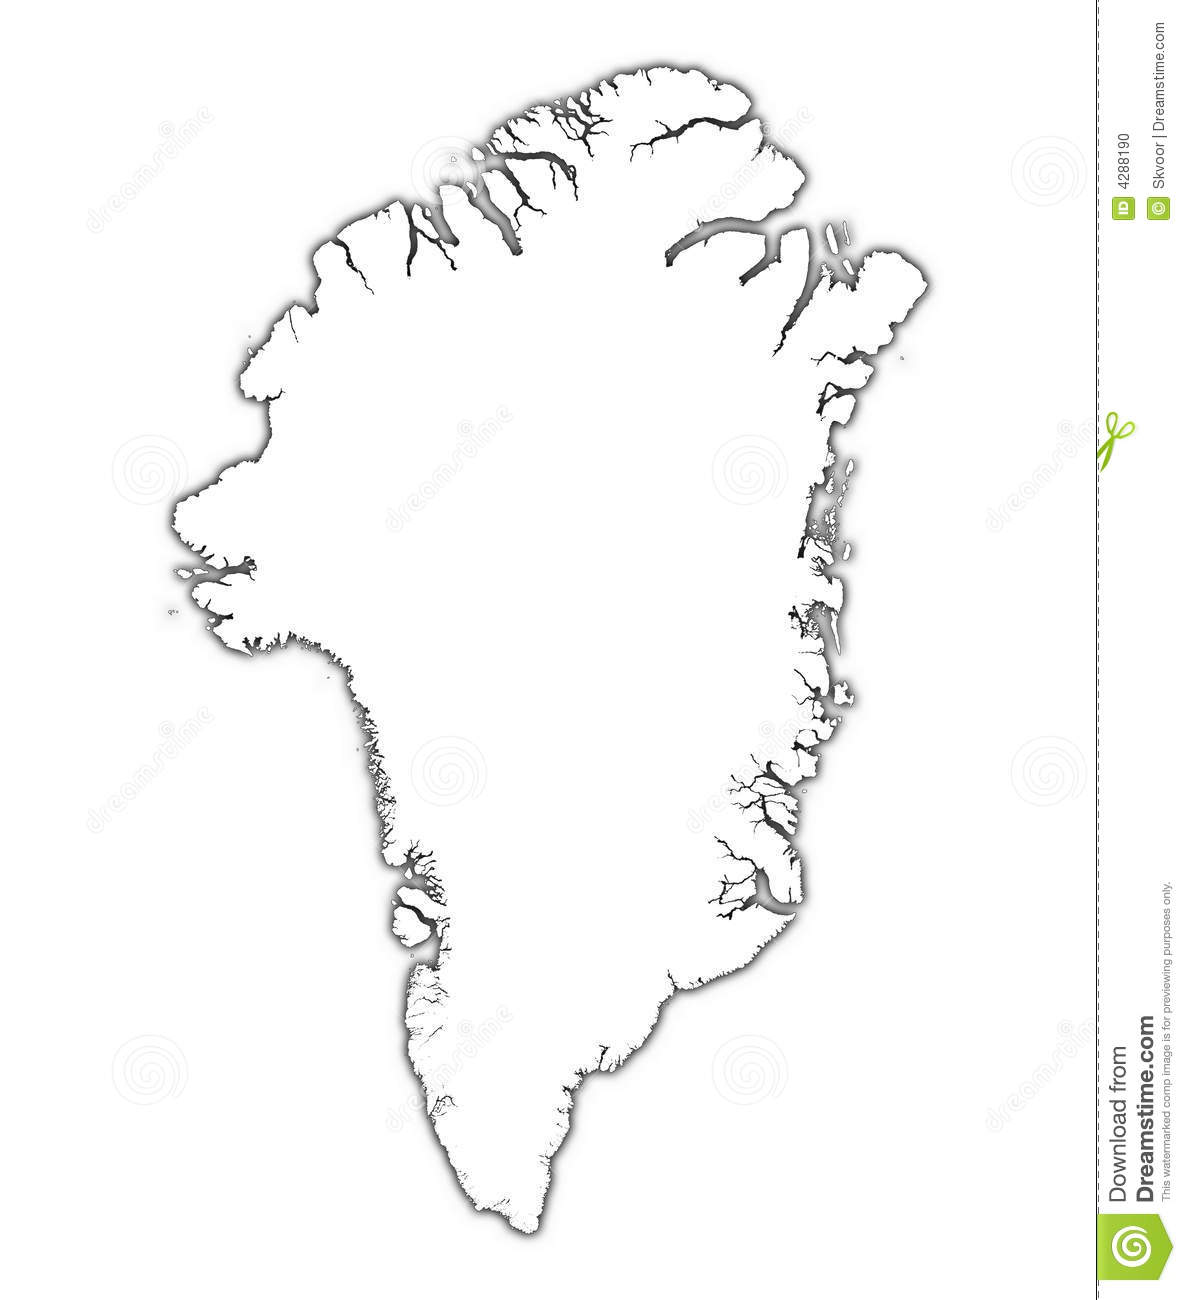 Greenland Map With Shadow Stock Photo   Image  4288190